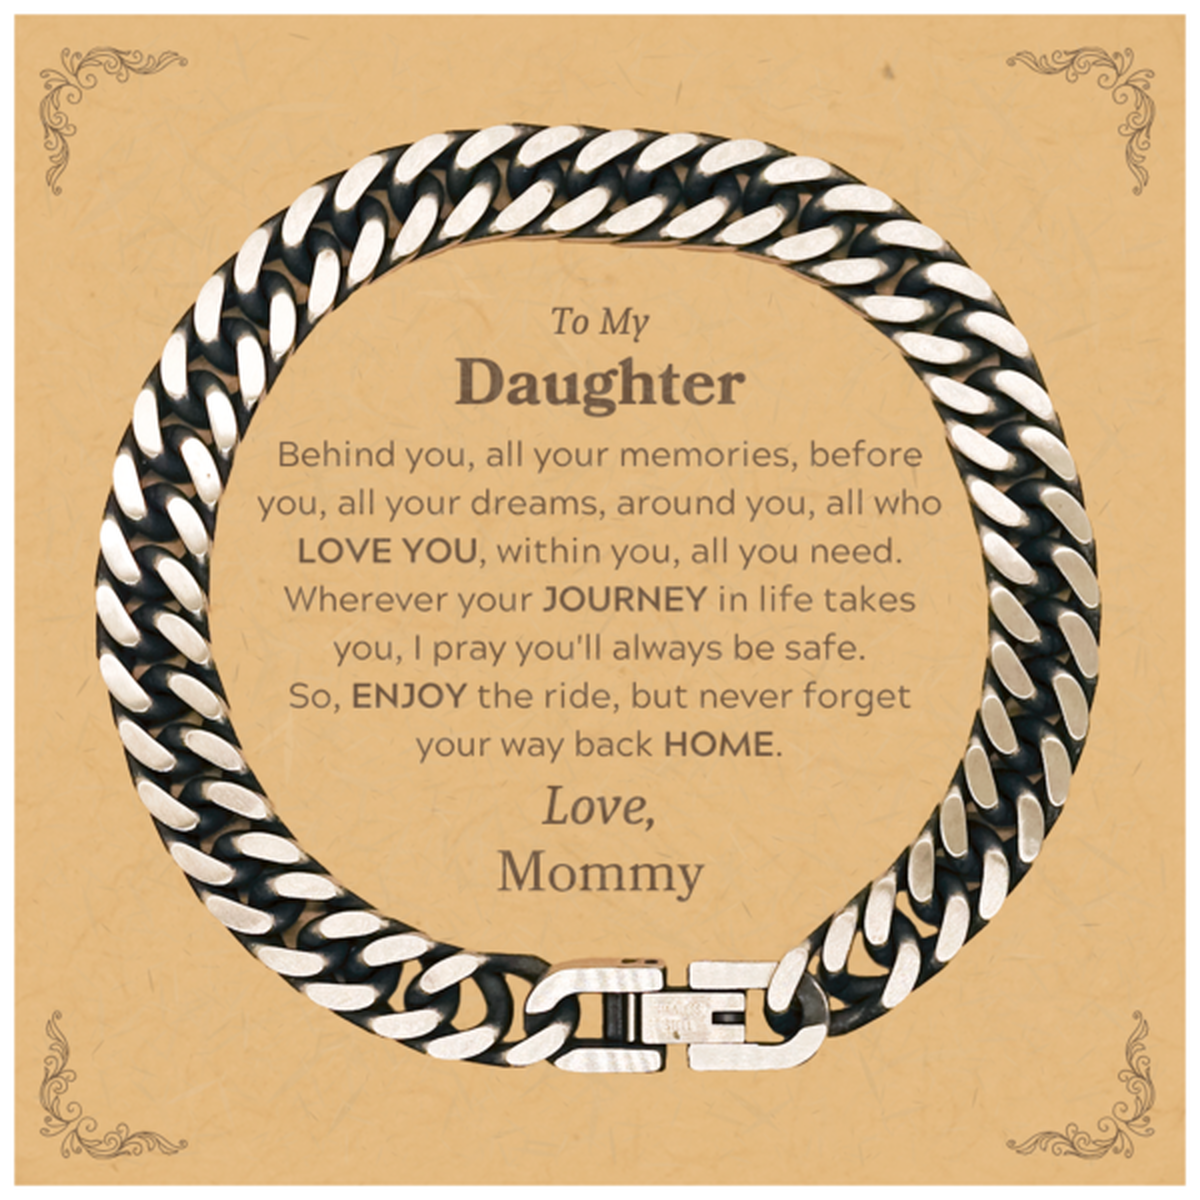 To My Daughter Graduation Gifts from Mommy, Daughter Cuban Link Chain Bracelet Christmas Birthday Gifts for Daughter Behind you, all your memories, before you, all your dreams. Love, Mommy